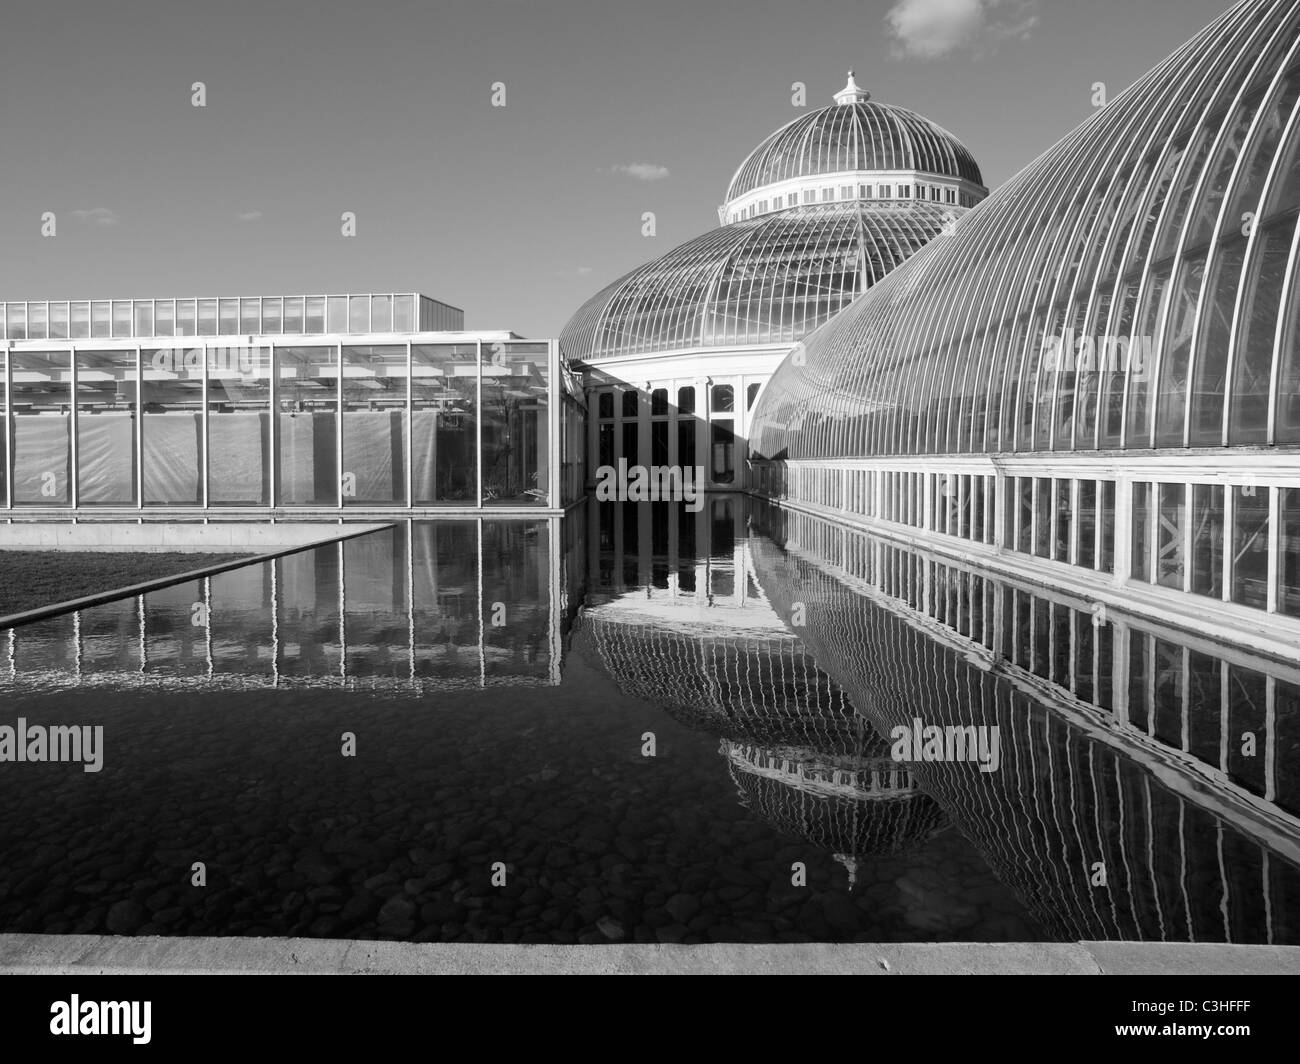 Marjorie McNeely Conservatory and education center at Como Park, St. Paul, MN USA, May 2011 Stock Photo